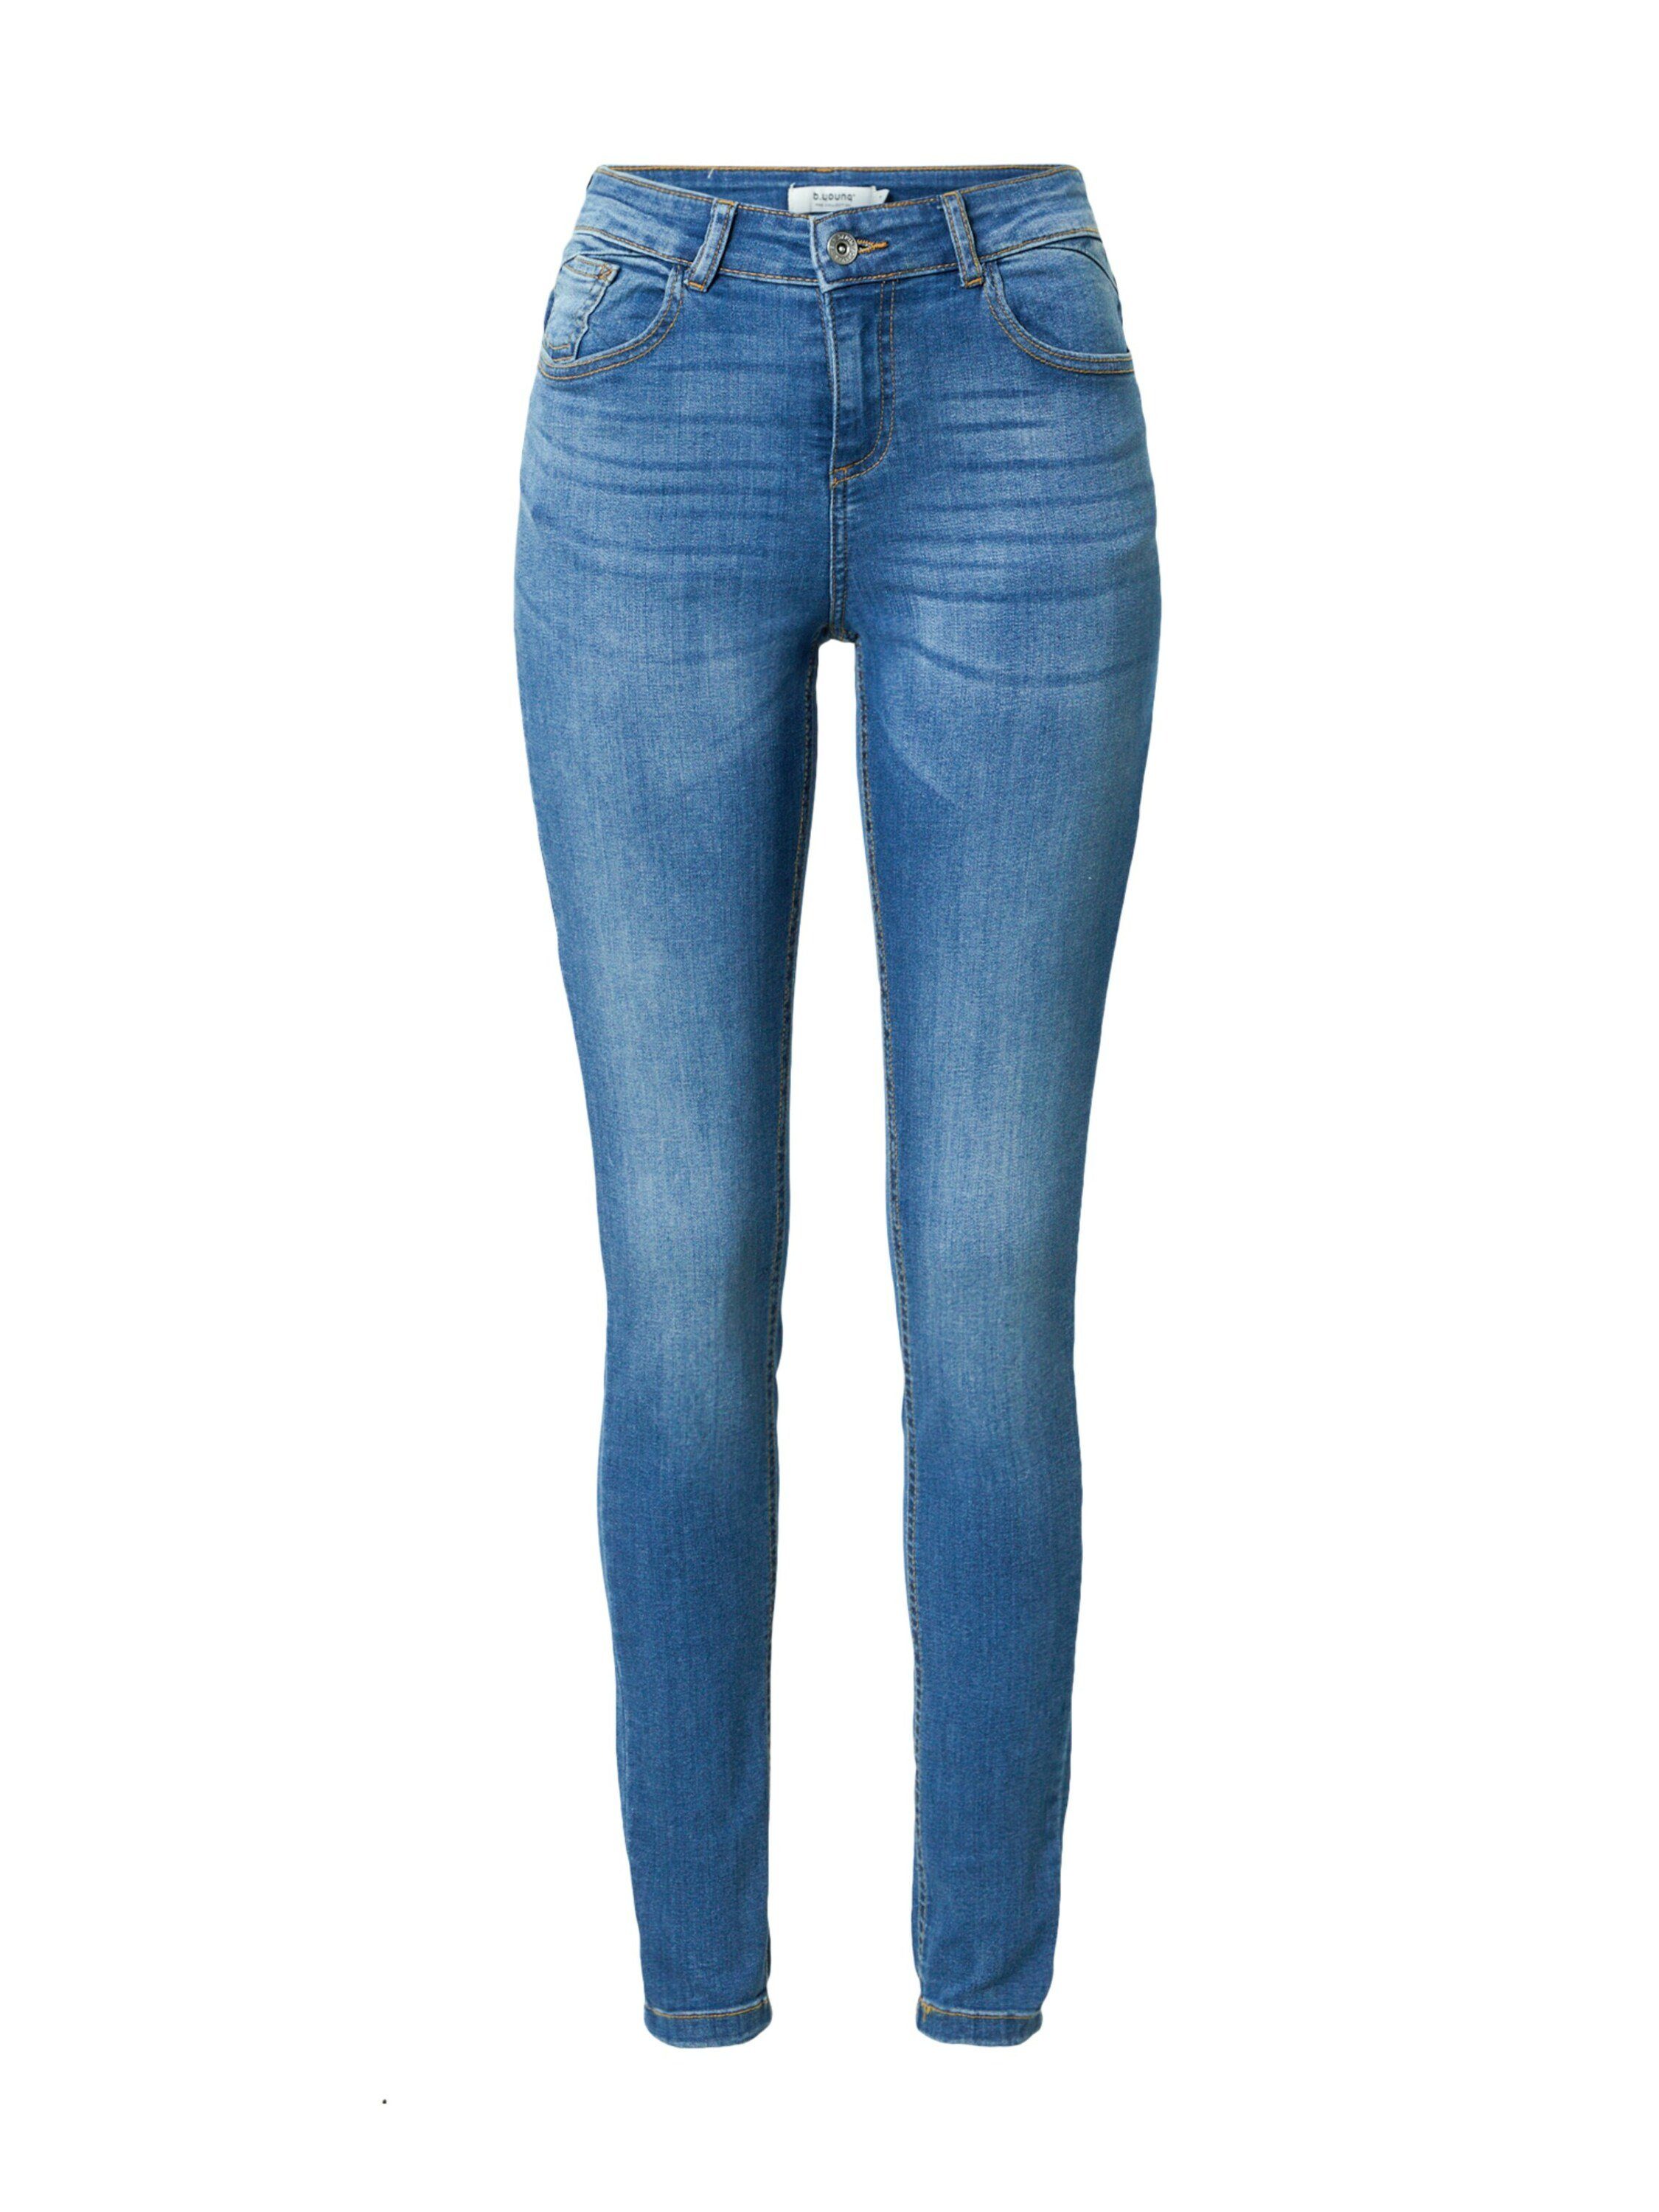 Weiteres b.young Detail Luni Skinny-fit-Jeans (1-tlg) Lola Plain/ohne Details,